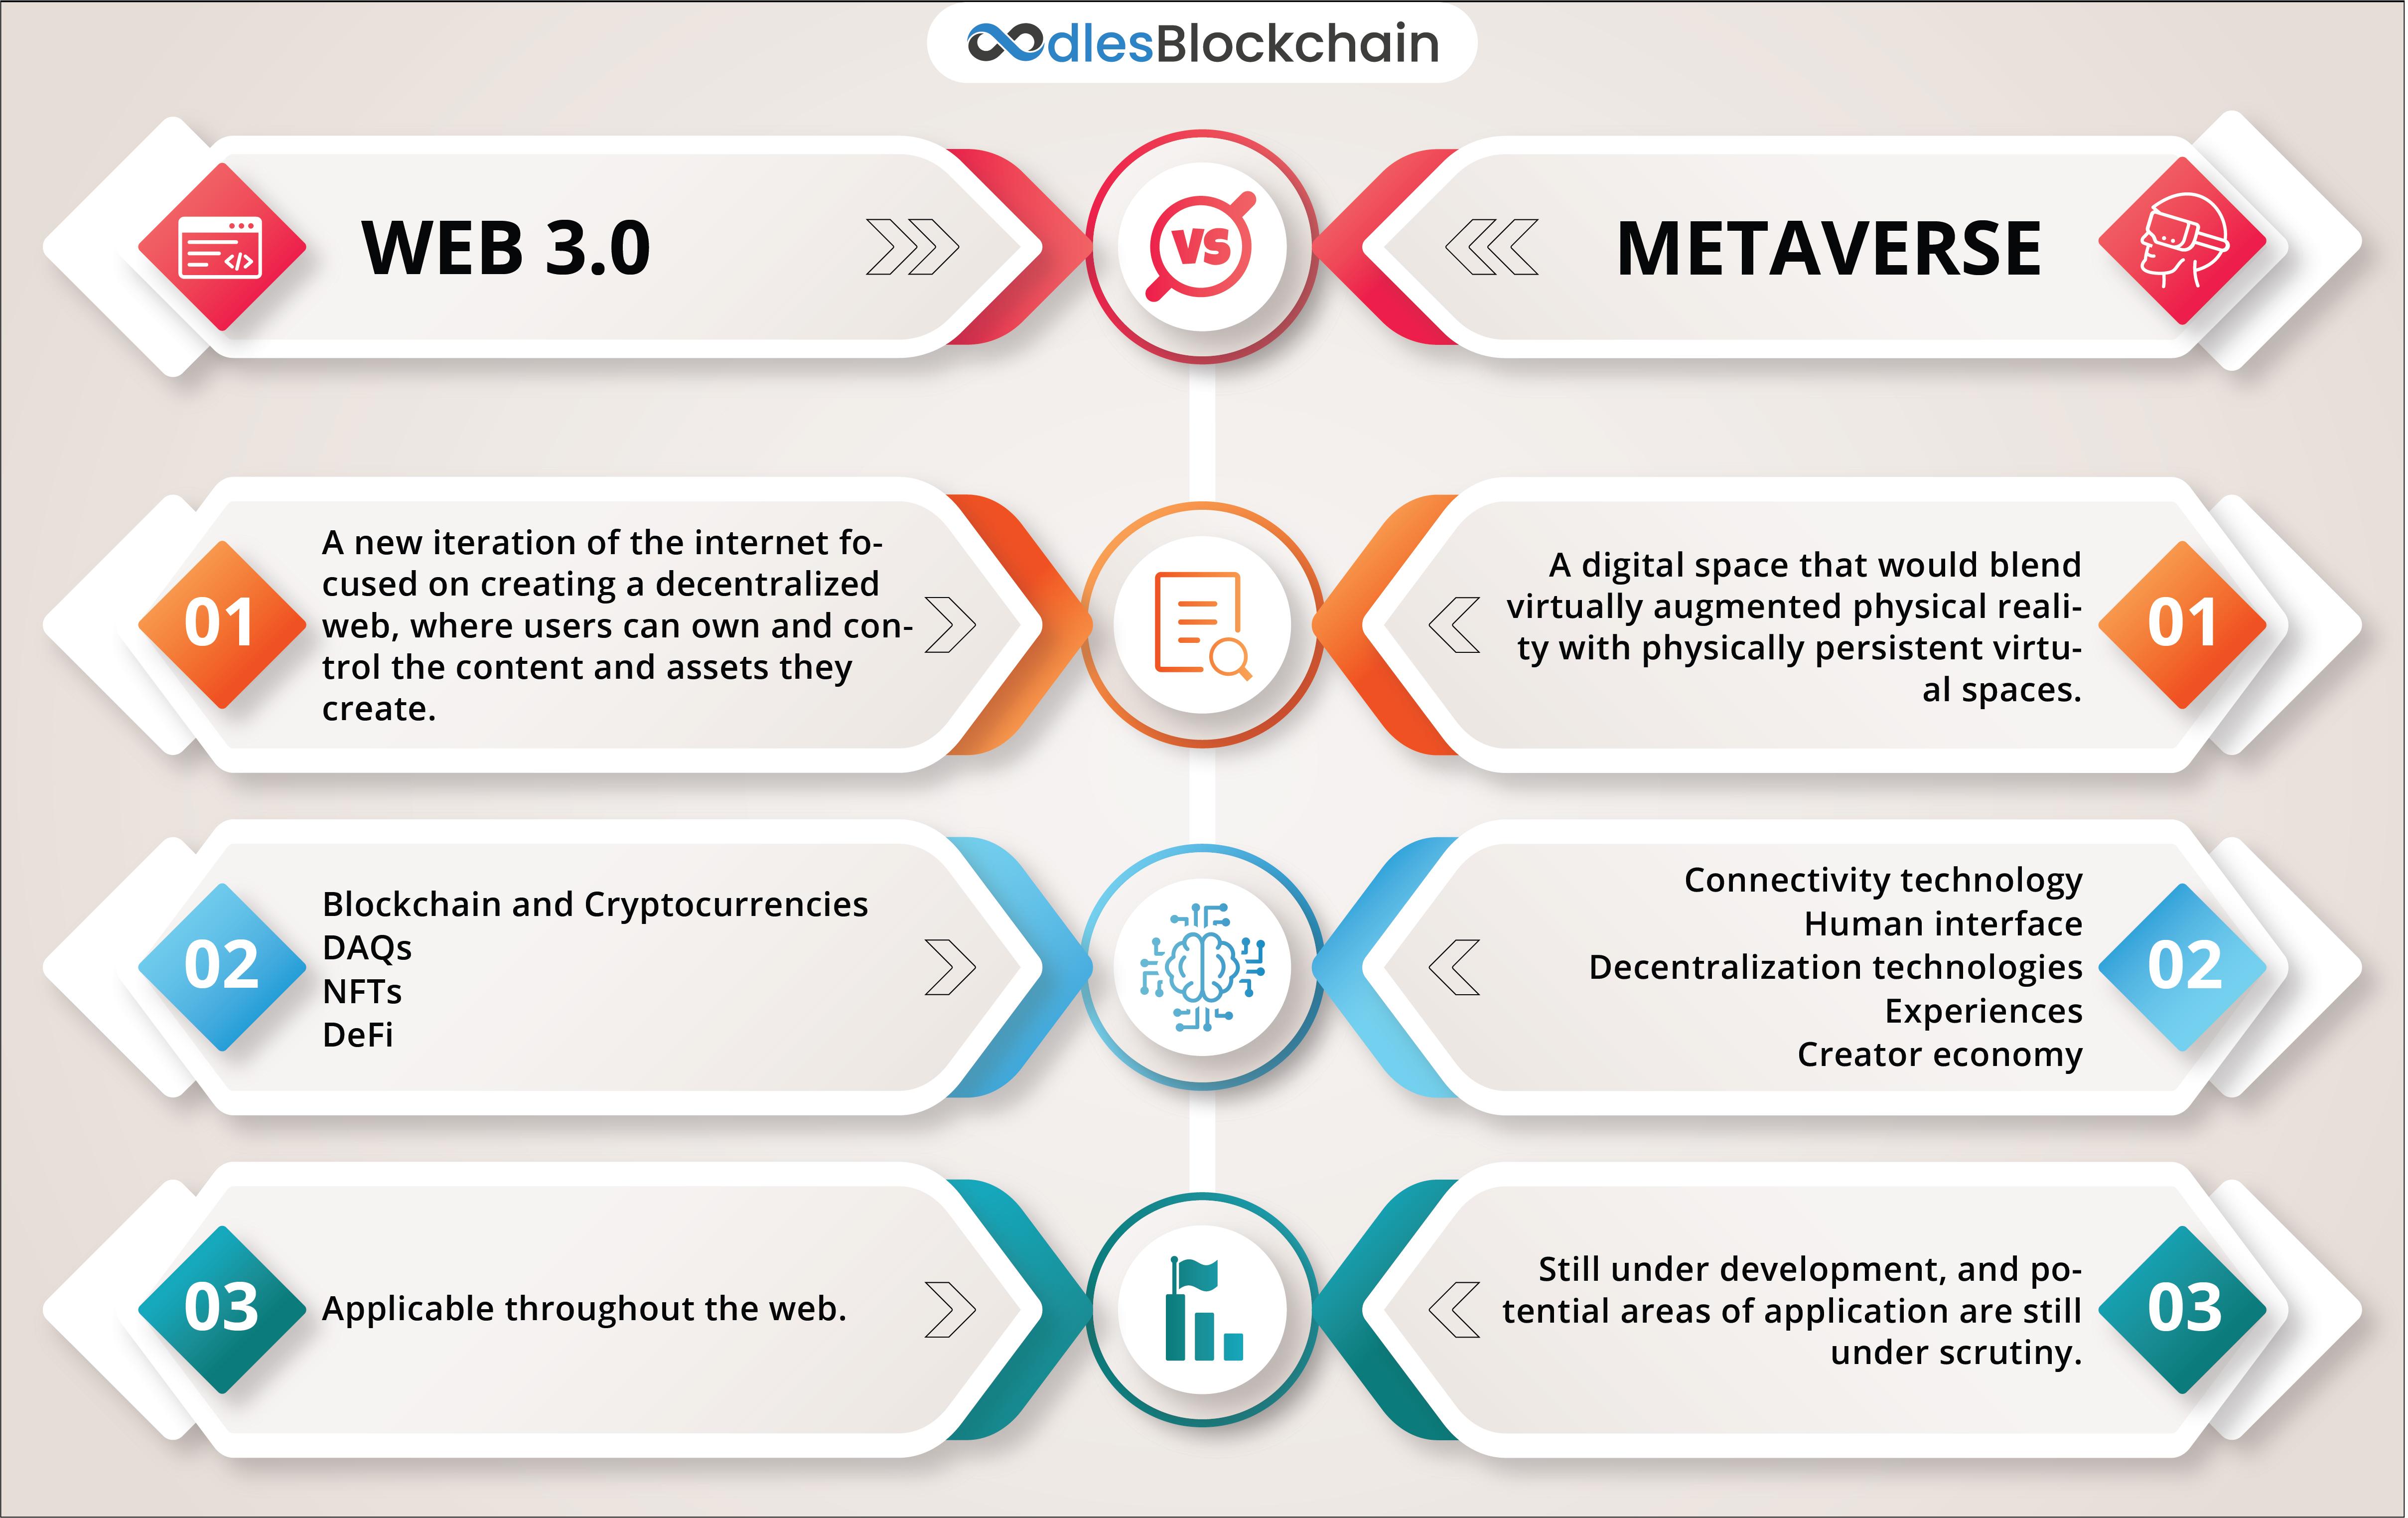 How Web 3.0 and Metaverse Differ